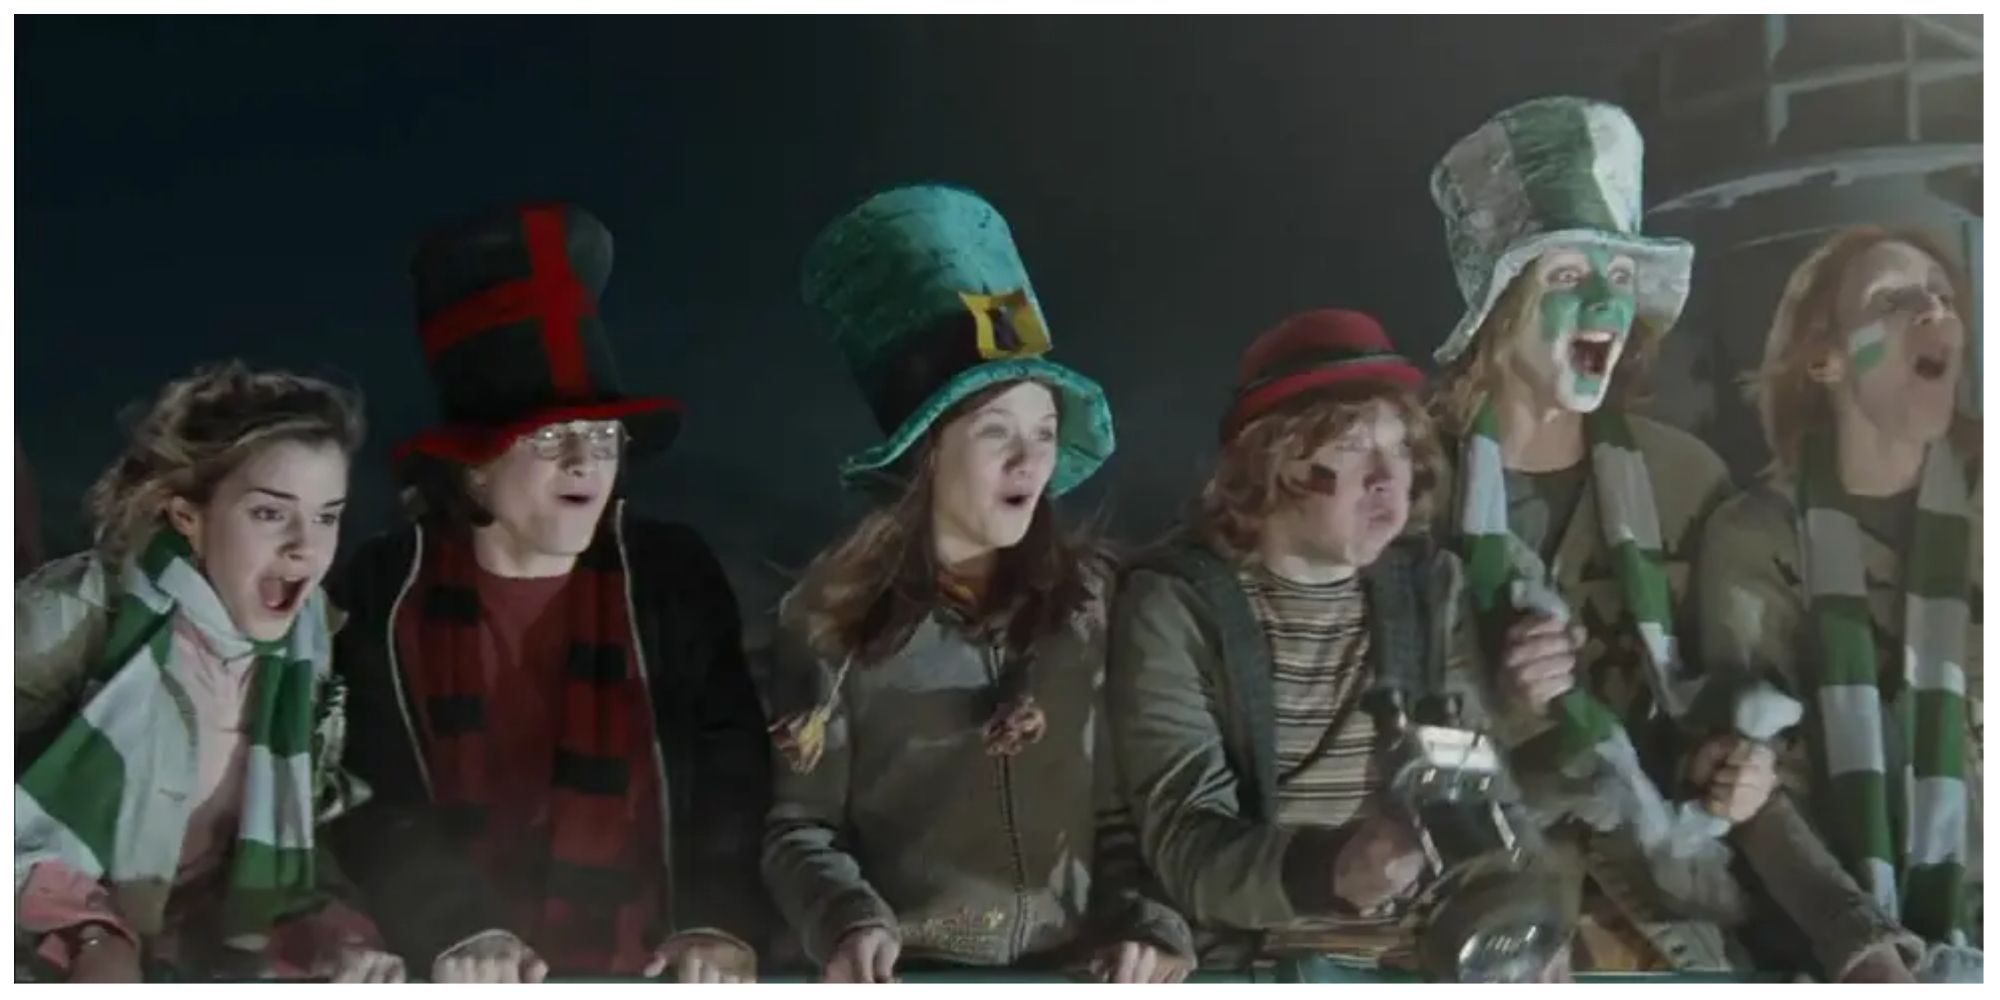 Harry Potter and friends cheering during the Quidditch World Cup